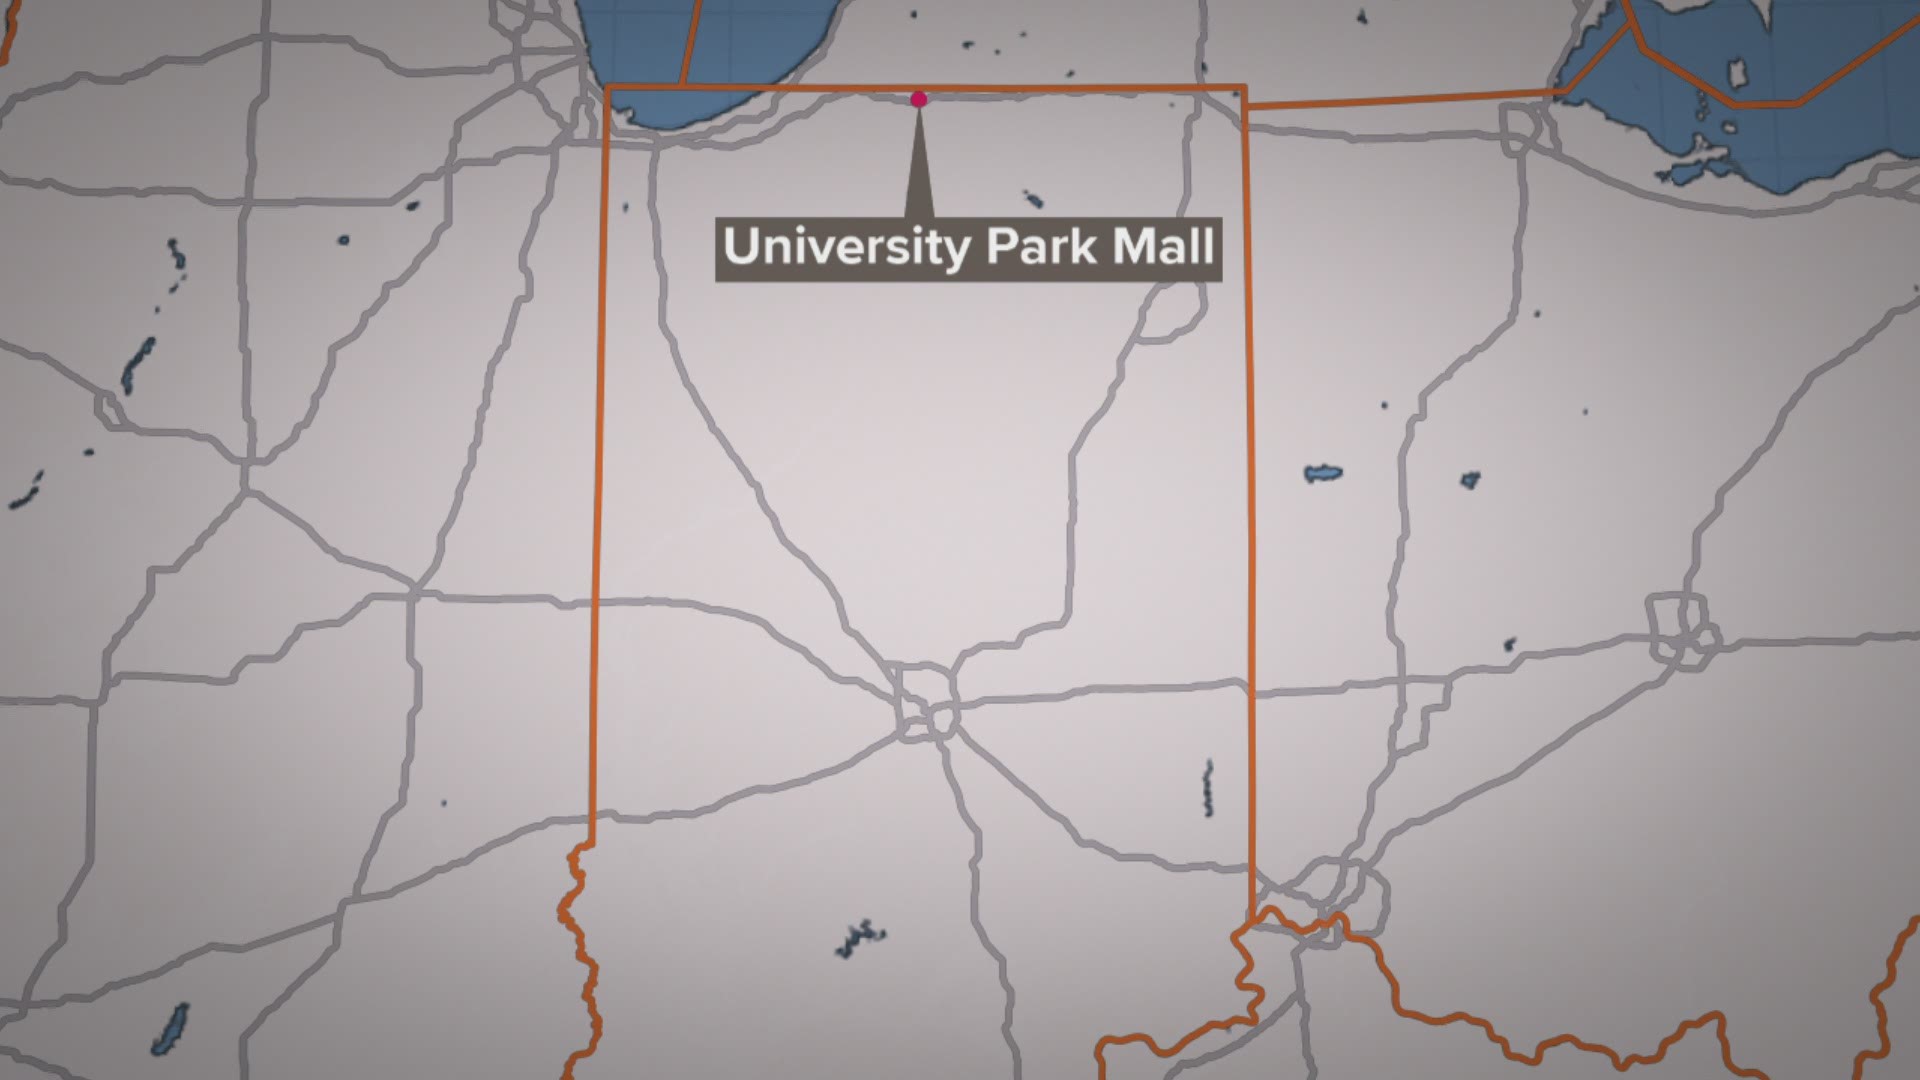 Police in Mishawaka are investigating a shooting at University Park Mall where one person has reportedly died.